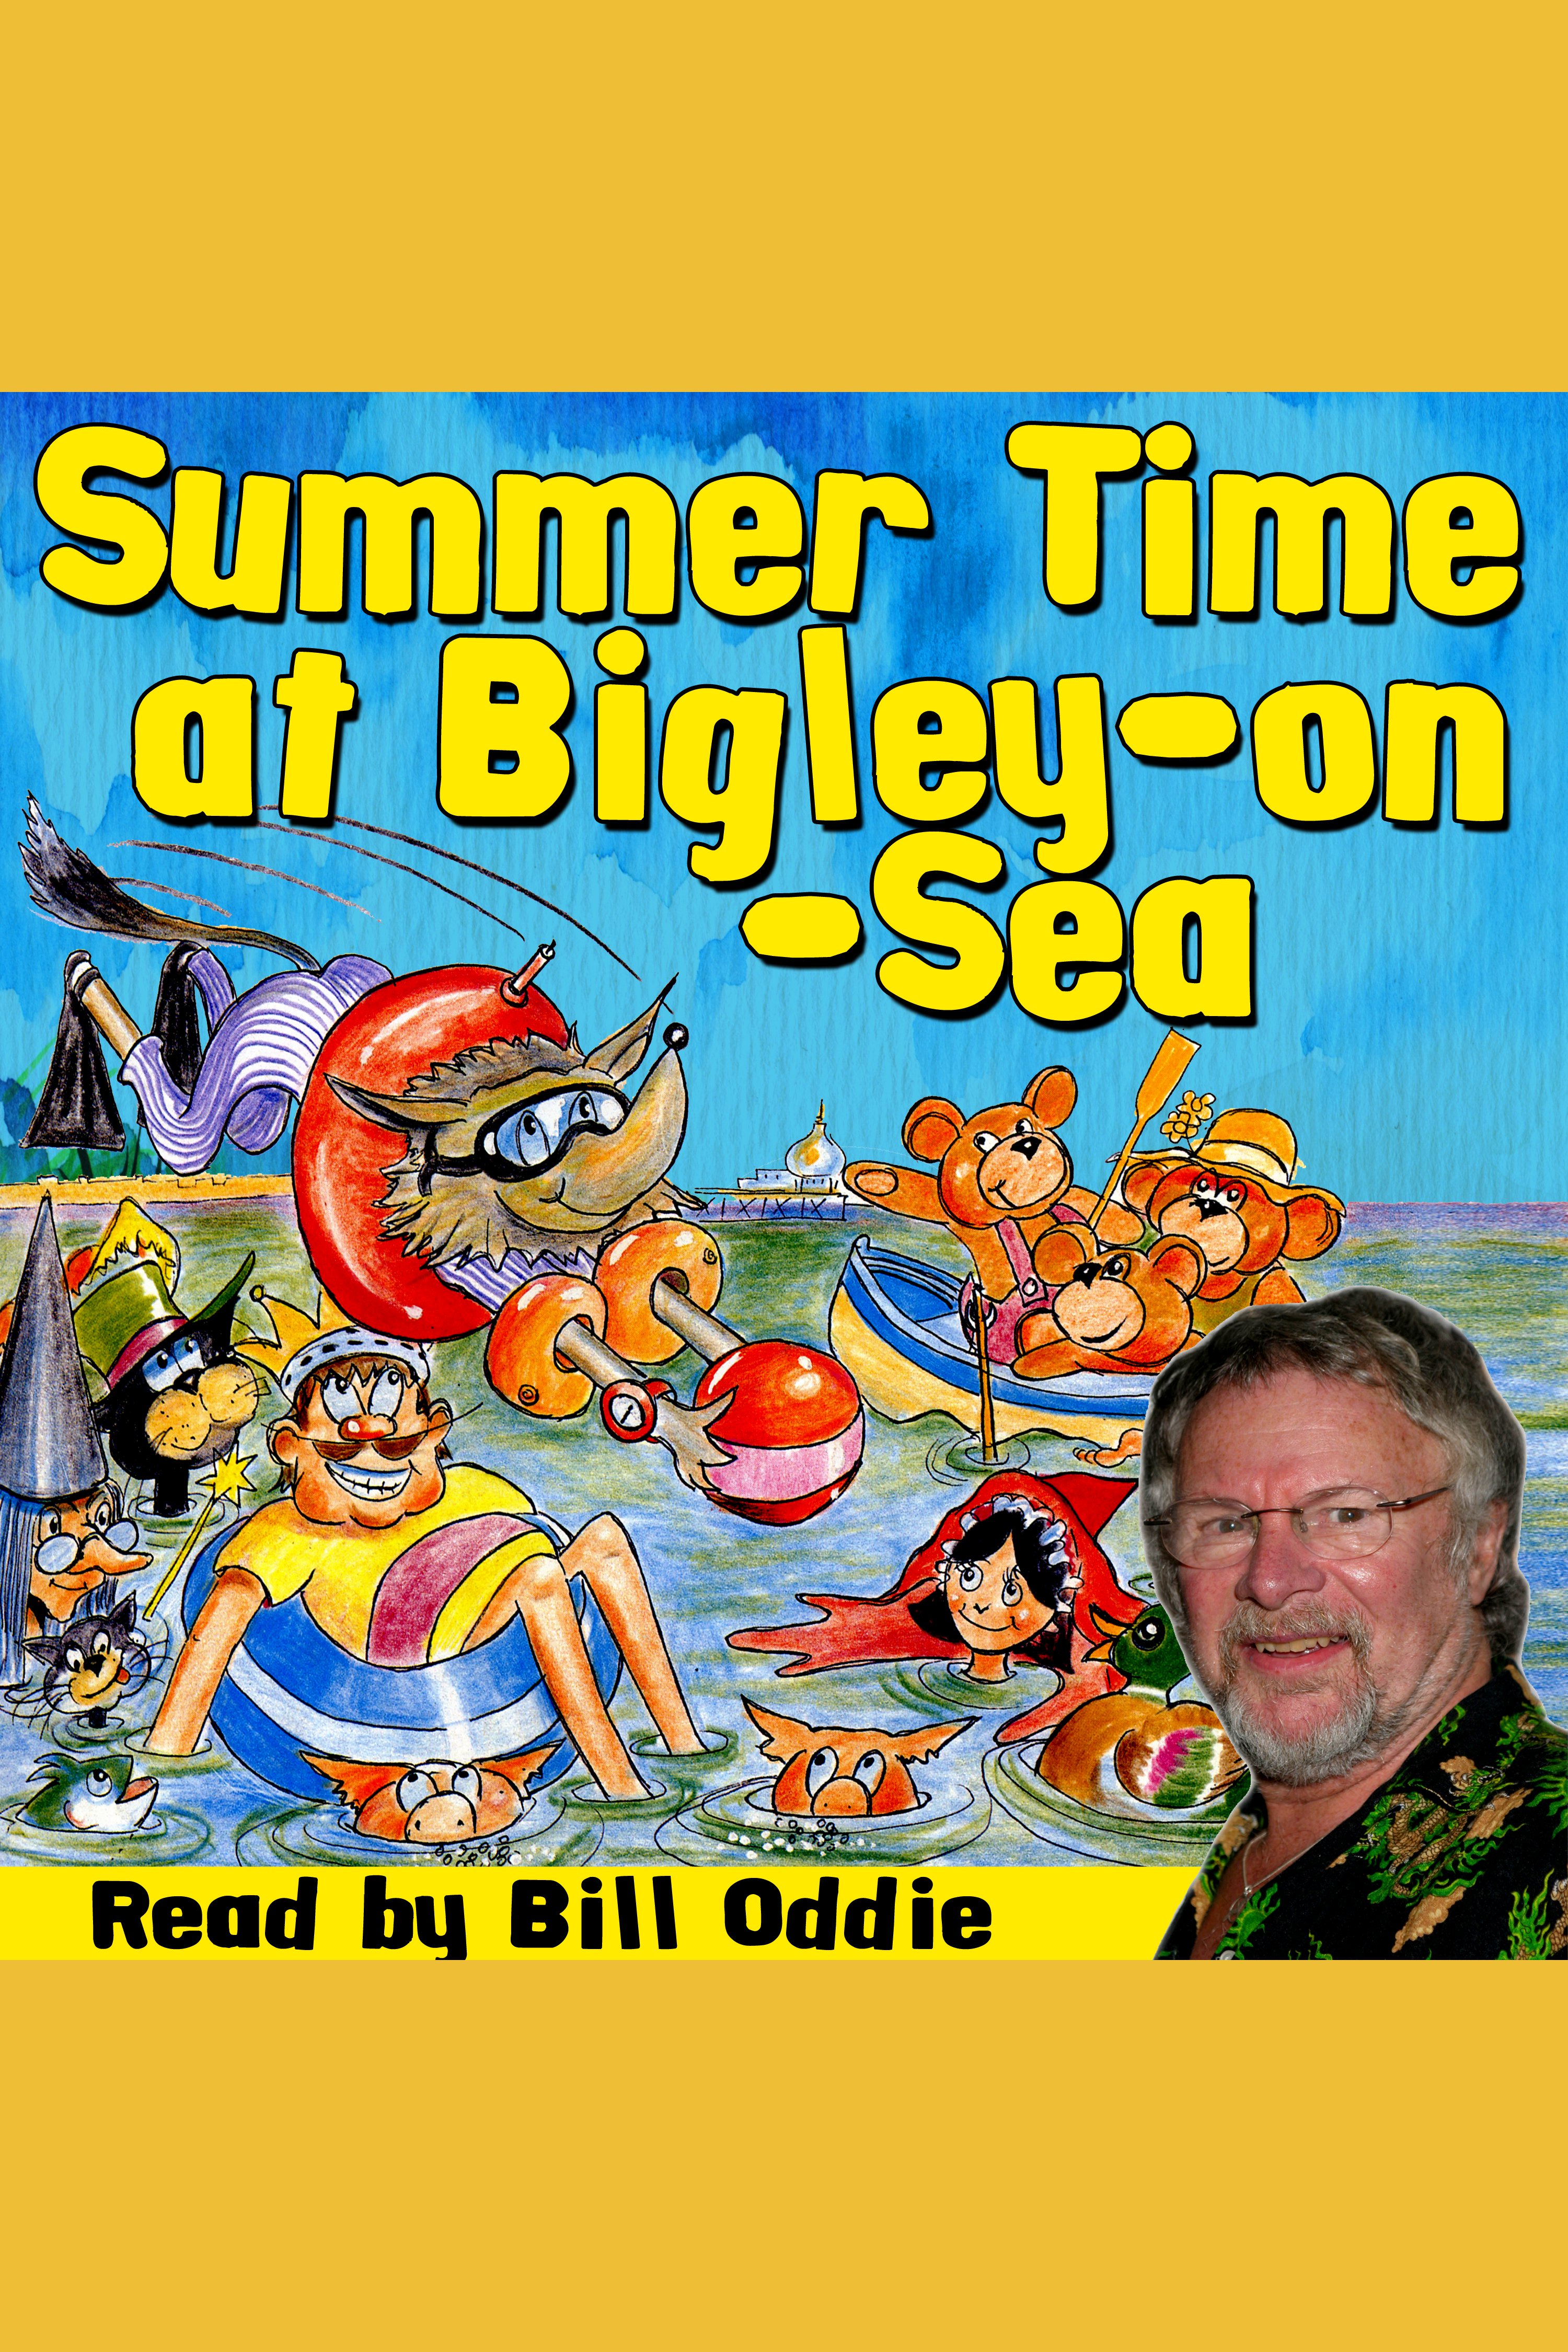 Summer Time at Bigley-on-Sea cover image